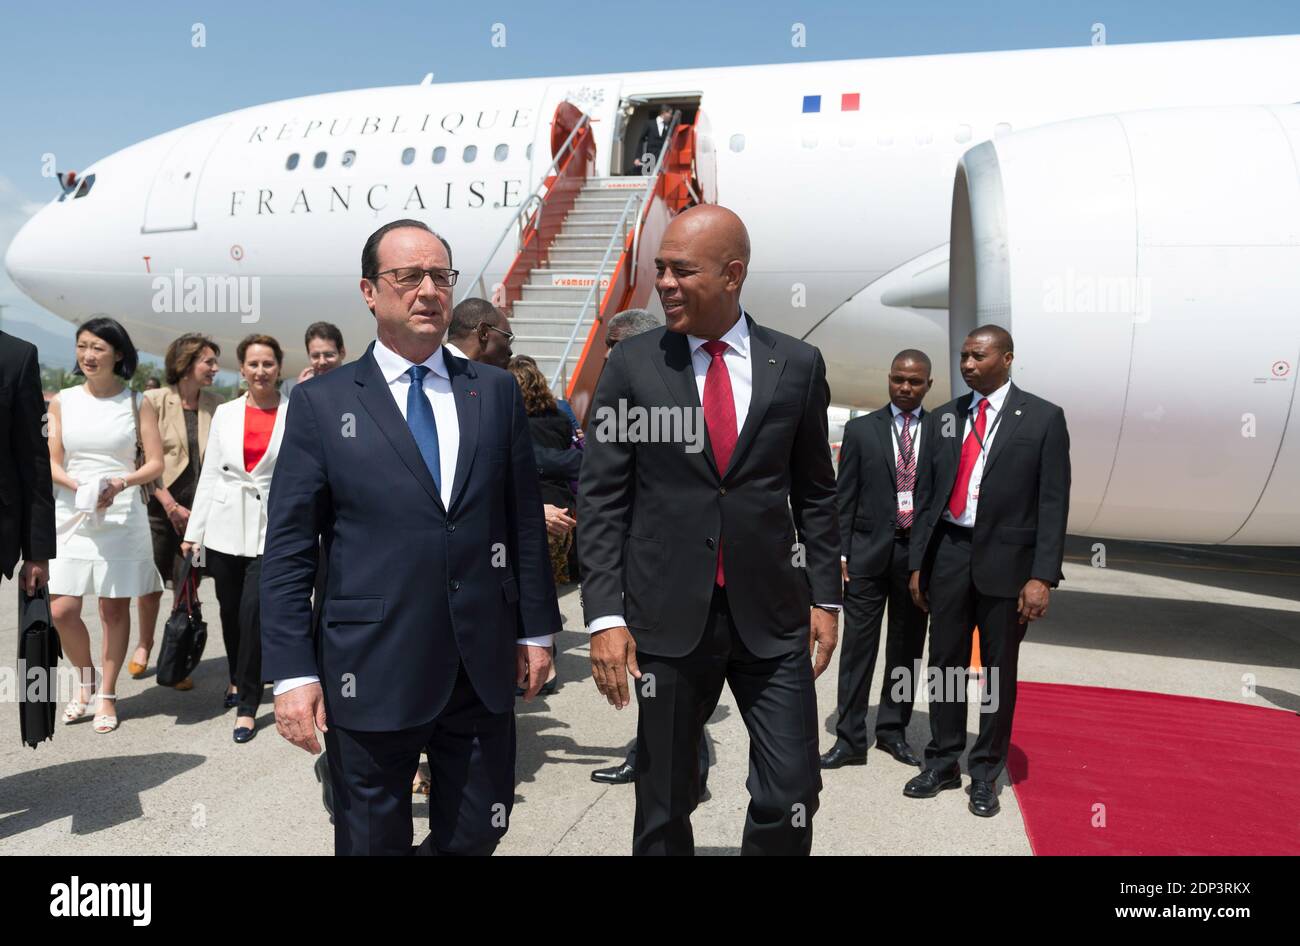 French President Francois Hollande is welcomed by his Haitian counterpart Michel Joseph Martelly as he arrives to Toussaint Louverture international airport in Port-au-Prince, Haiti on May 12, 2015. Hollande is on a five-day tour to the Caribbean including Guadeloupe, Martinique, Cuba and Haiti. Photo by Jacques Witt/Pool/ABACAPRESS.COM Stock Photo